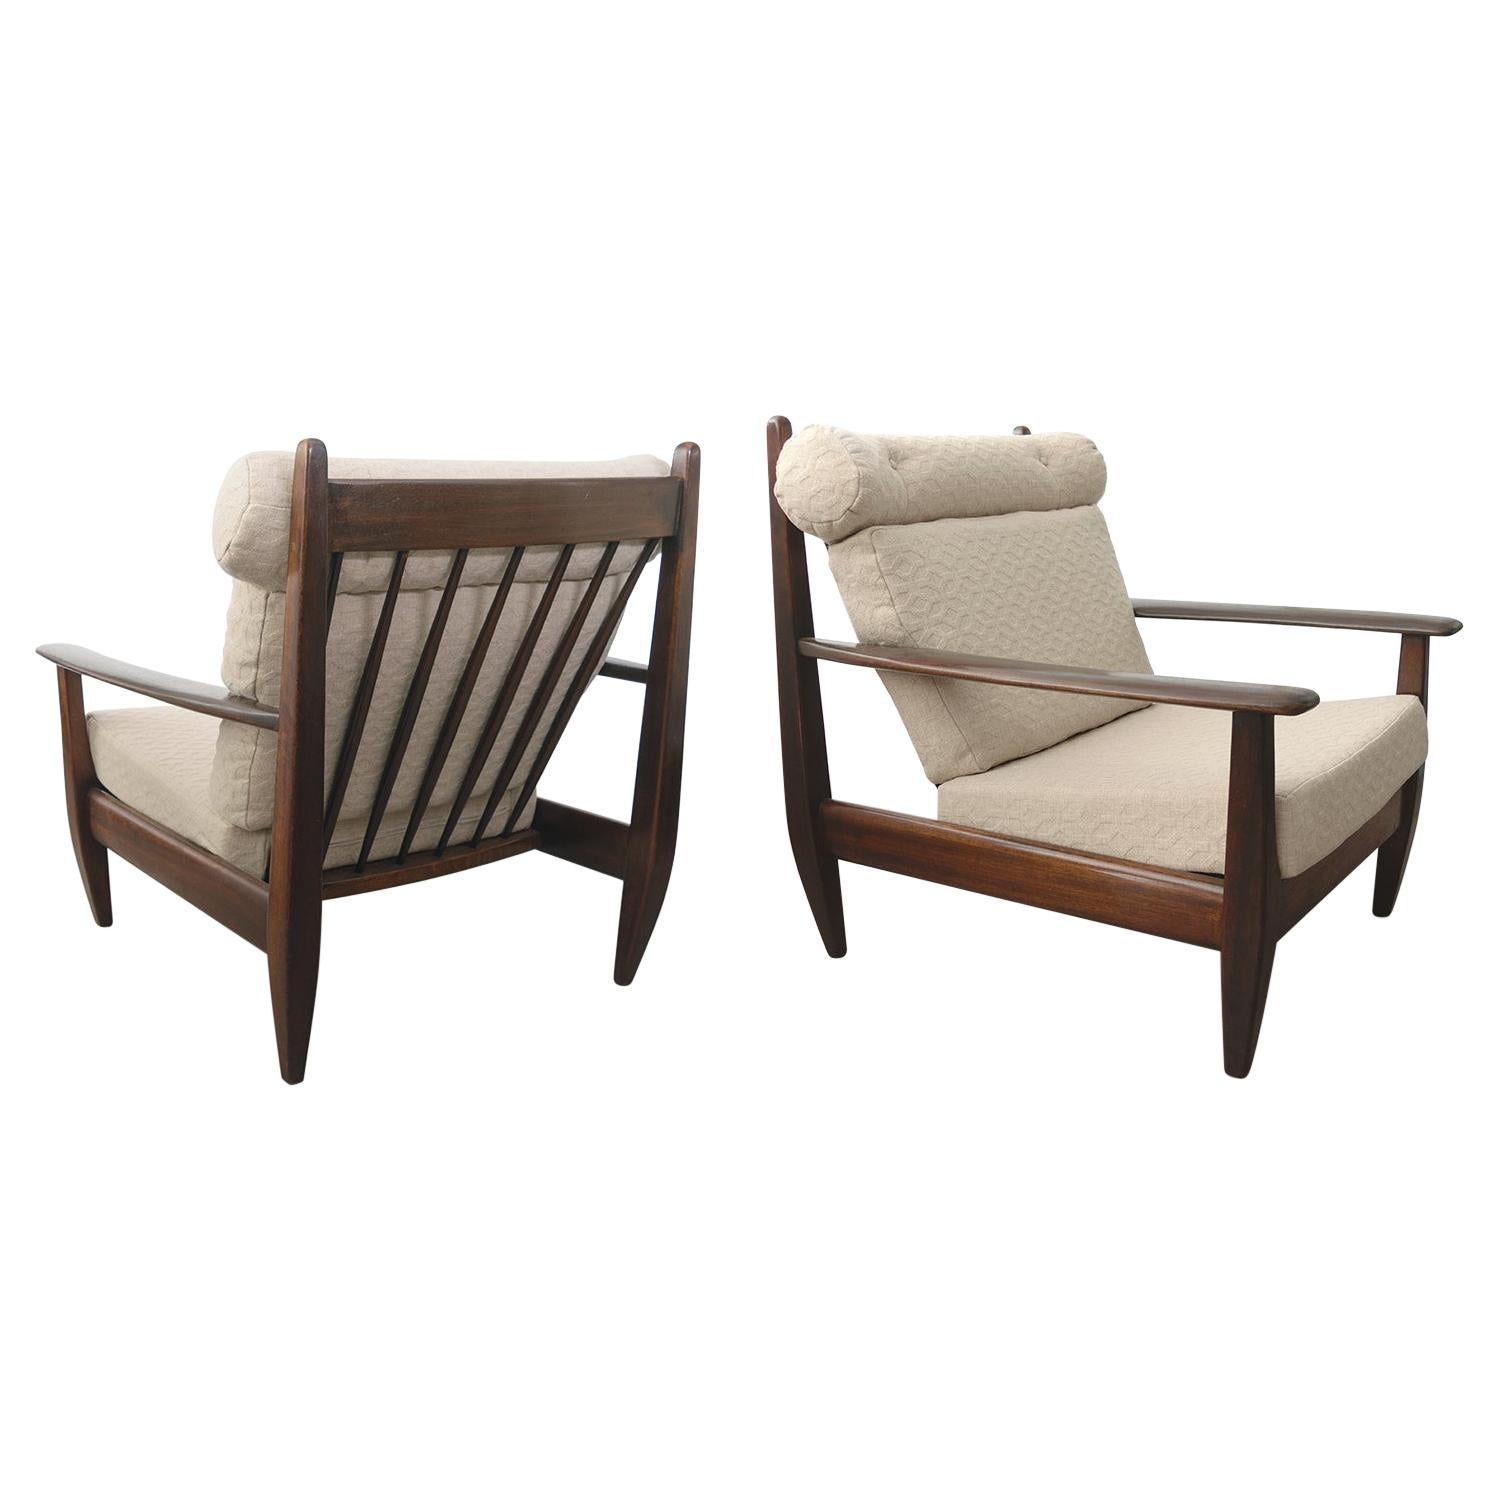 Brazilian Pair of Lounge Chairs in Carved Solid Teak, 1960'S For Sale